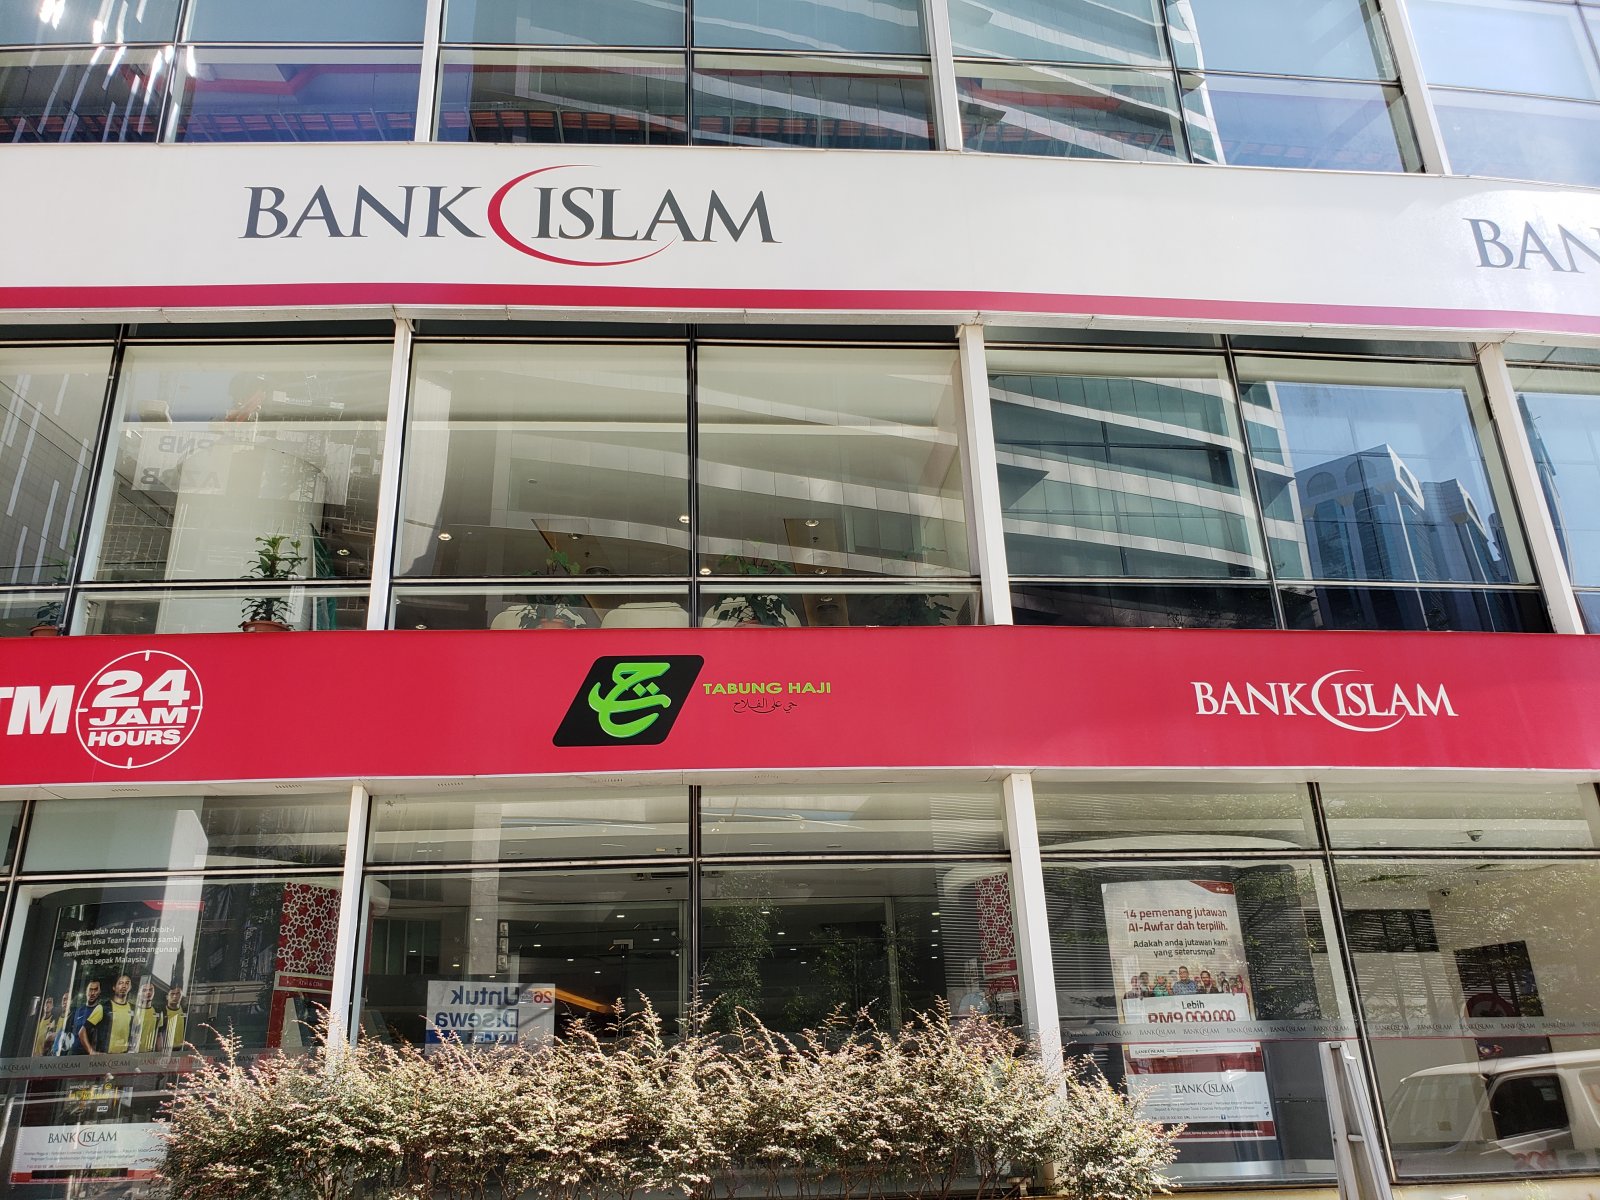 Bank Islam extends targeted repayment assistance to June 30, 2021